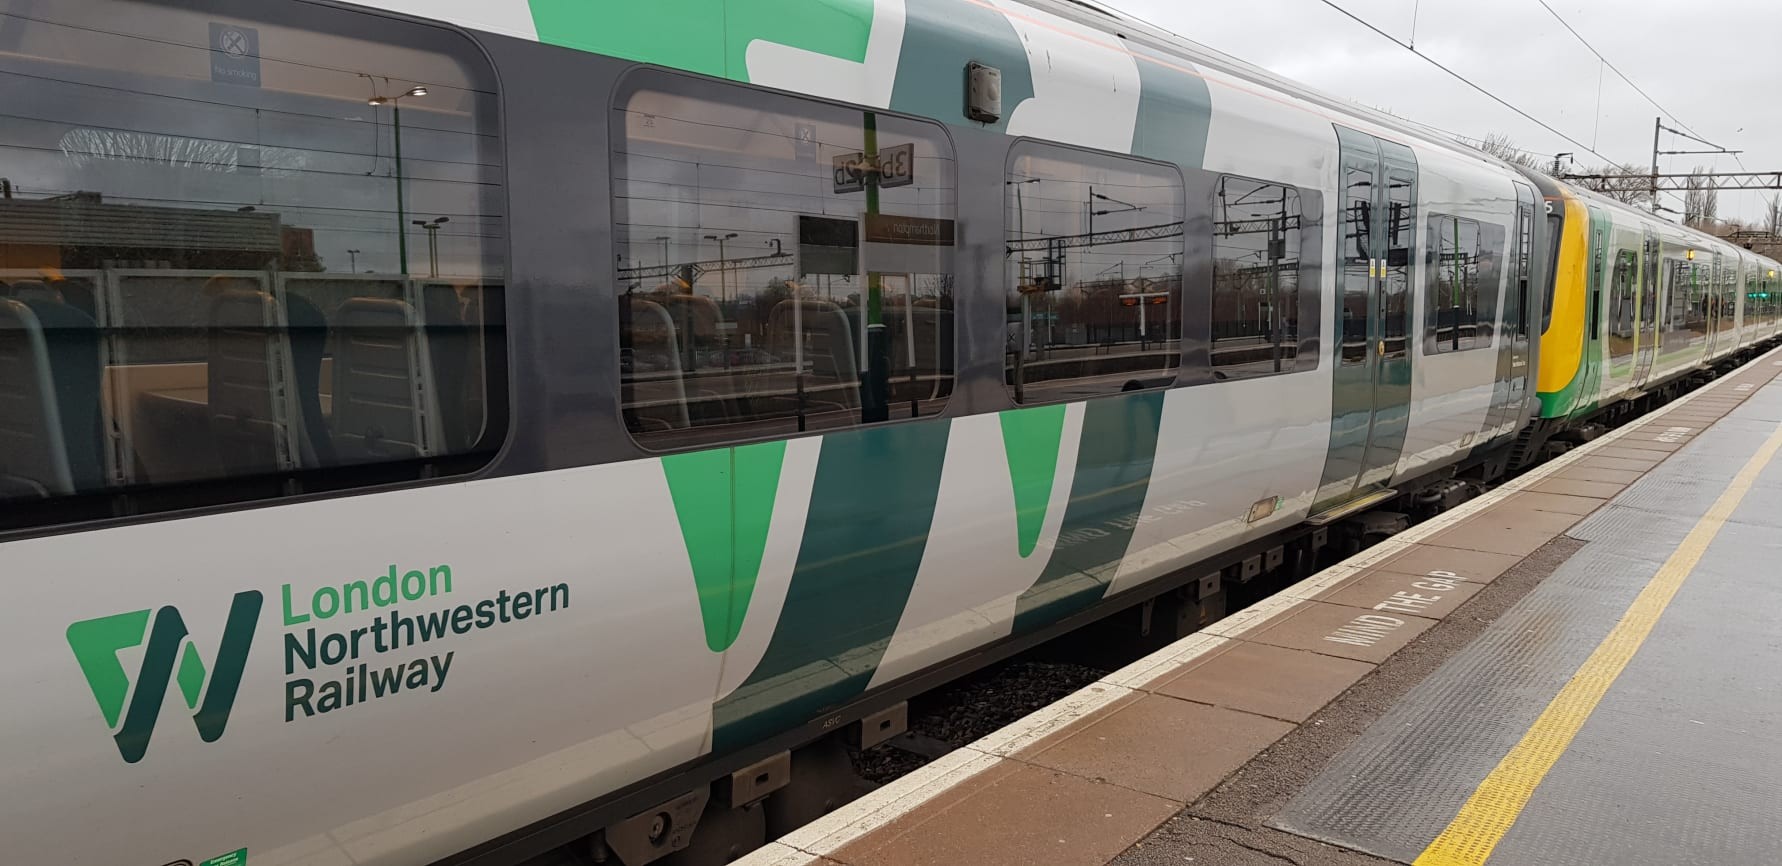 Additional carriages for busy commuter services at Apsley and Kings Langley